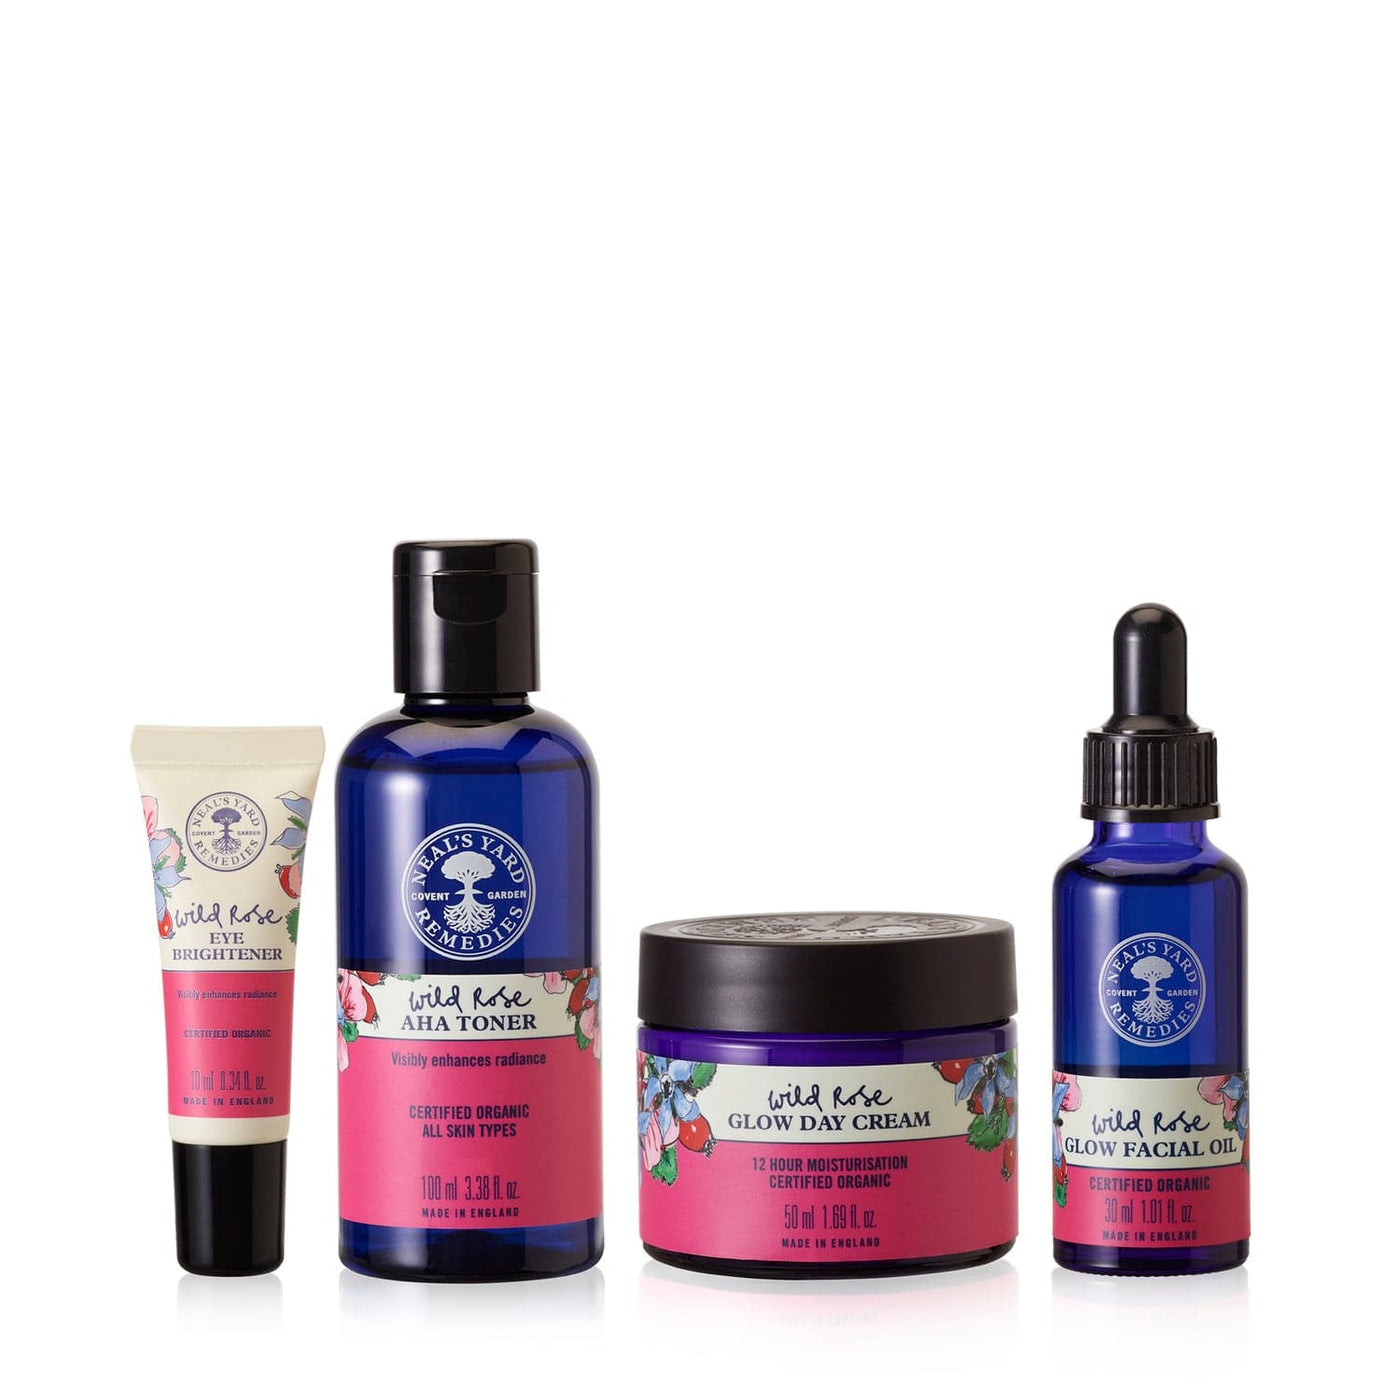 Neal's Yard Remedies Gifts & Collections Wild Rose Natural Glow Collection